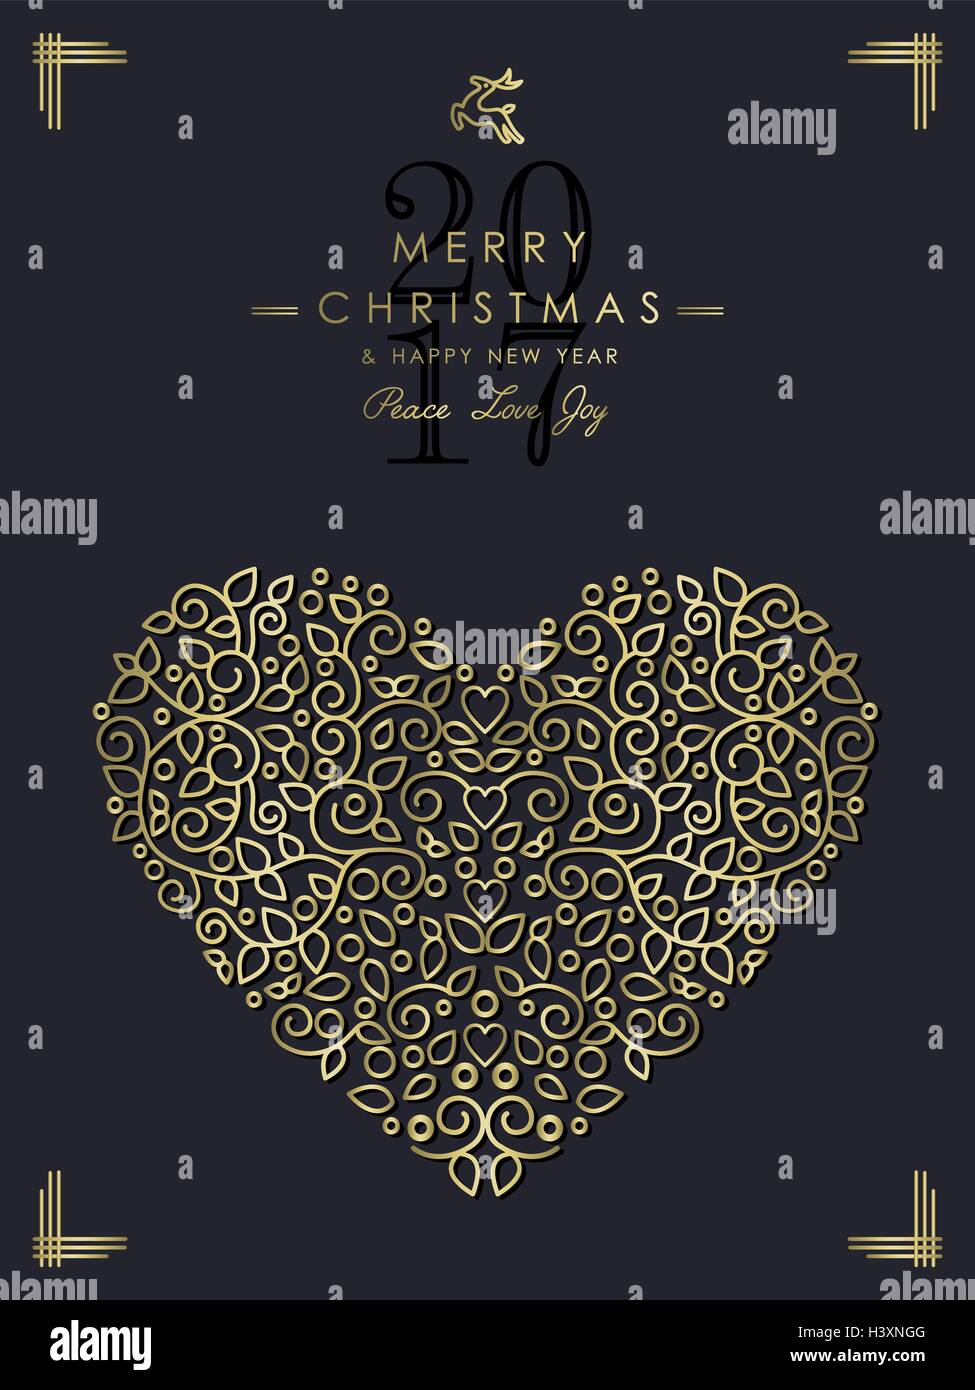 Merry Christmas Happy New Year 2017 greeting card background. Linear love heart shape with monogram decoration Stock Vector